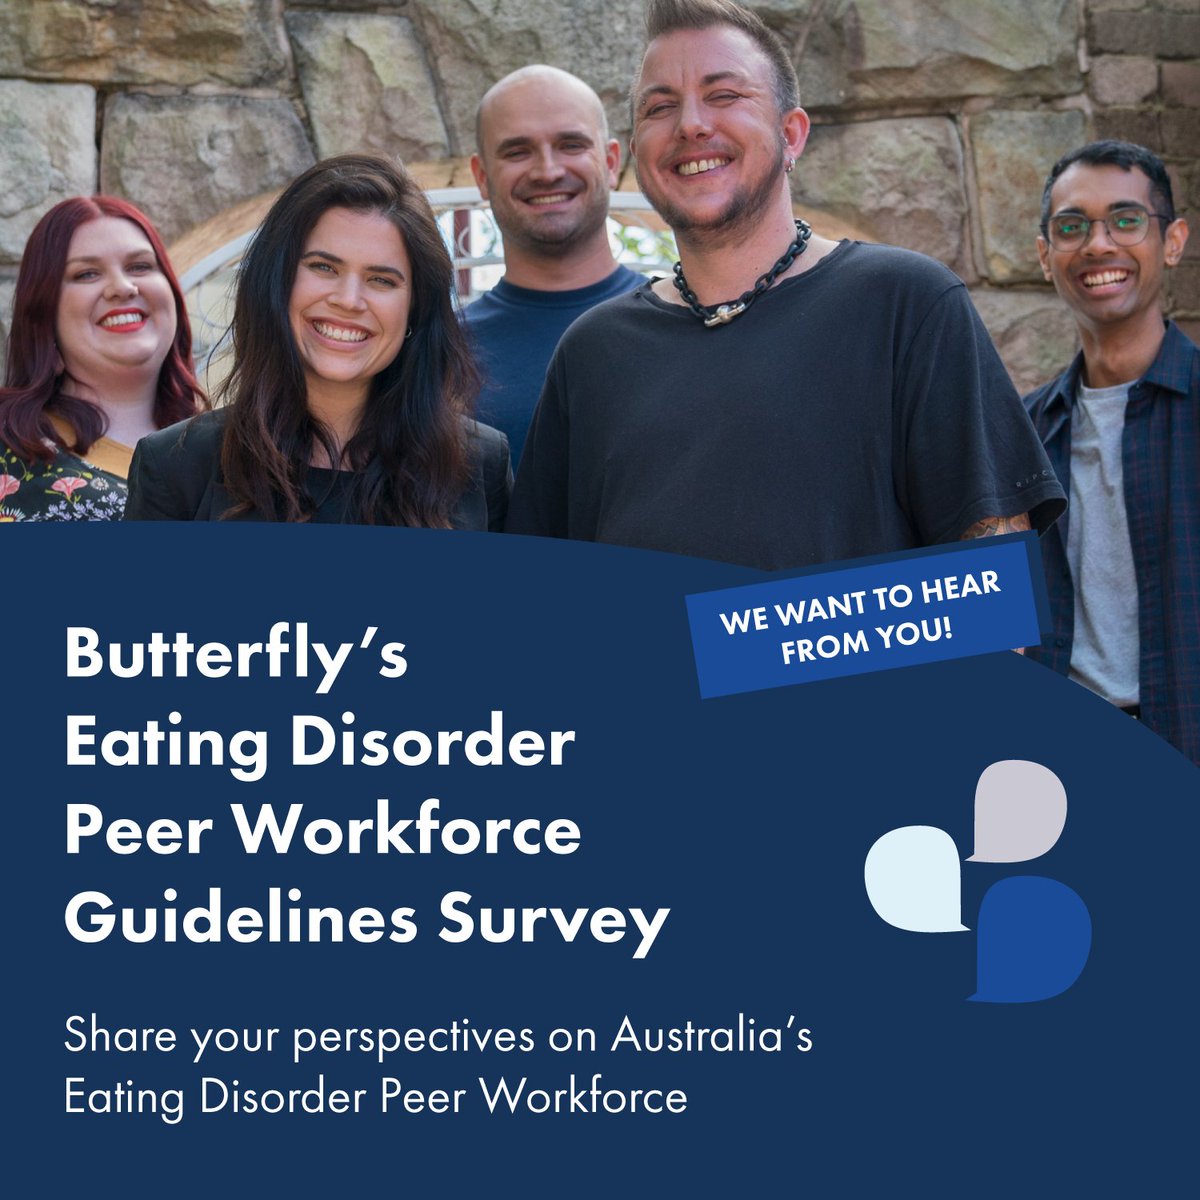 Butterfly is creating National #EatingDisorder #PeerWorkforce Guidelines to support an effective, safe & coordinated ED peer workforce in Aus. If you have an ED #livedexperience, are a carer/family member or are a peer worker, we want to hear from you! ⬇️
surveymonkey.com/r/99XMMNL